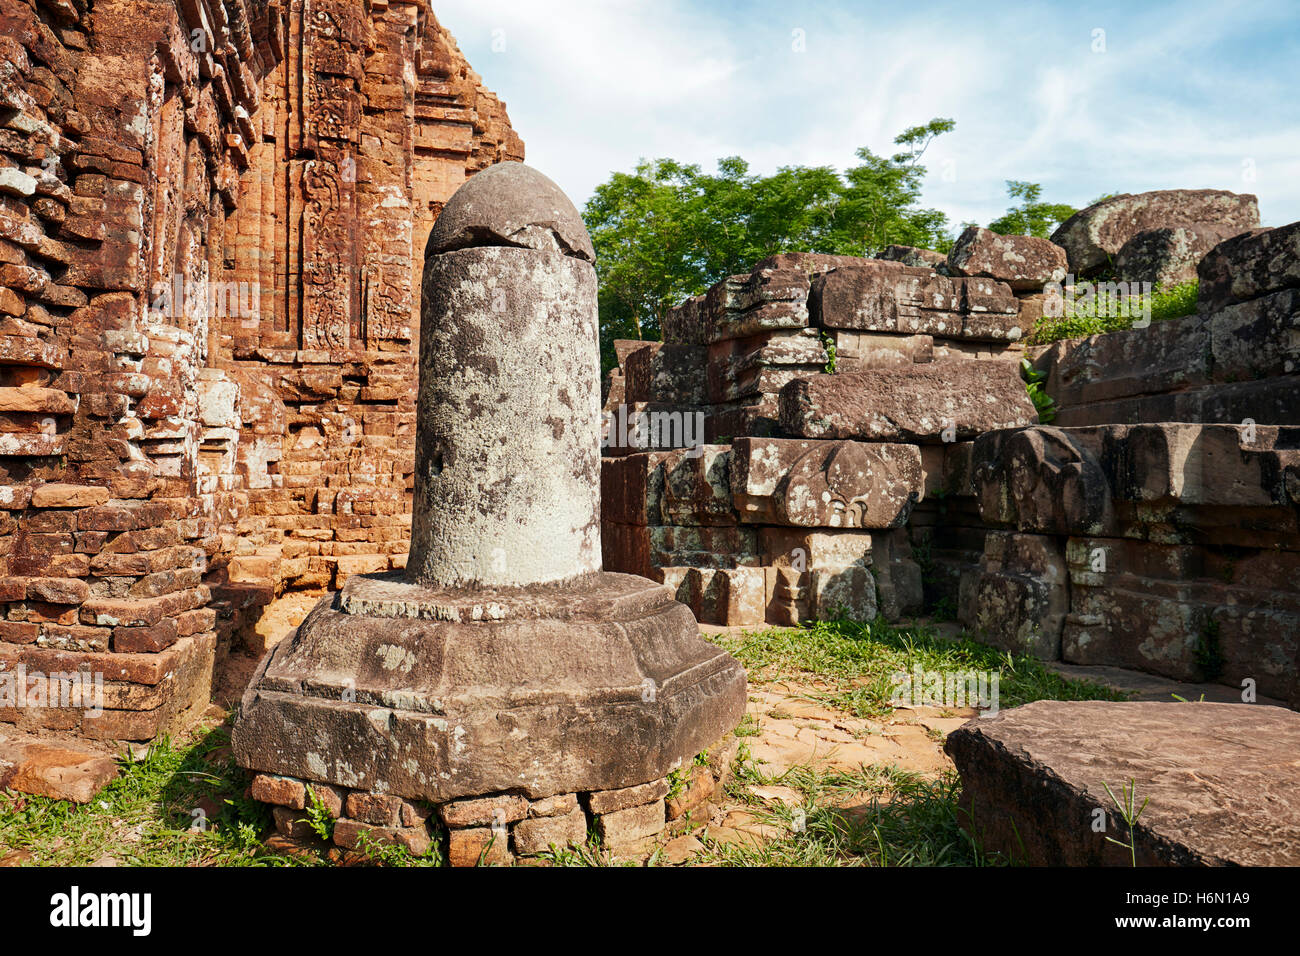 Shiva lingam at the ruined temple in Group D. My Son Sanctuary, Quang Nam Province, Vietnam. Stock Photo